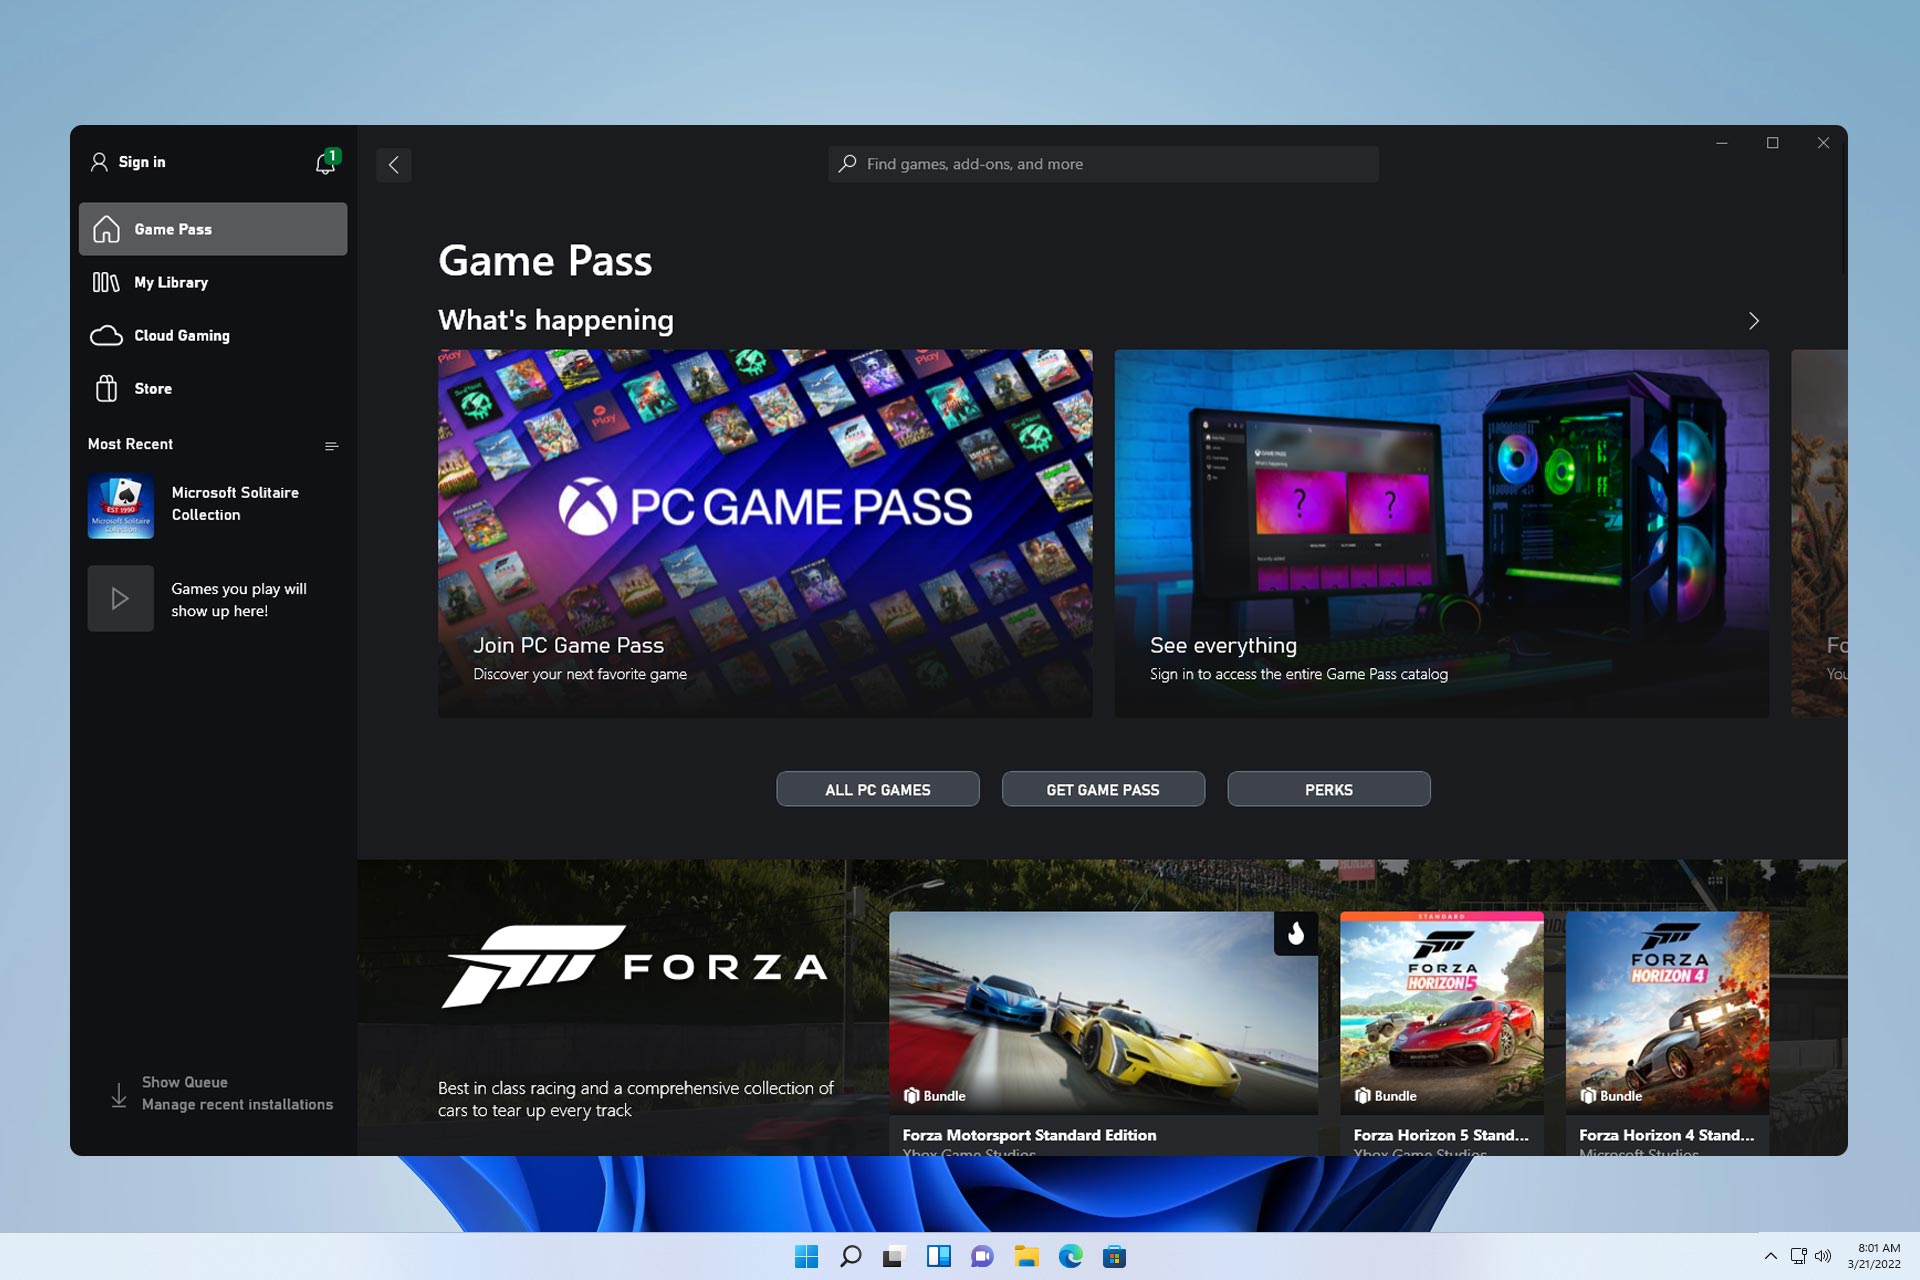 How to Use Xbox Game Pass for PC on Windows 10 